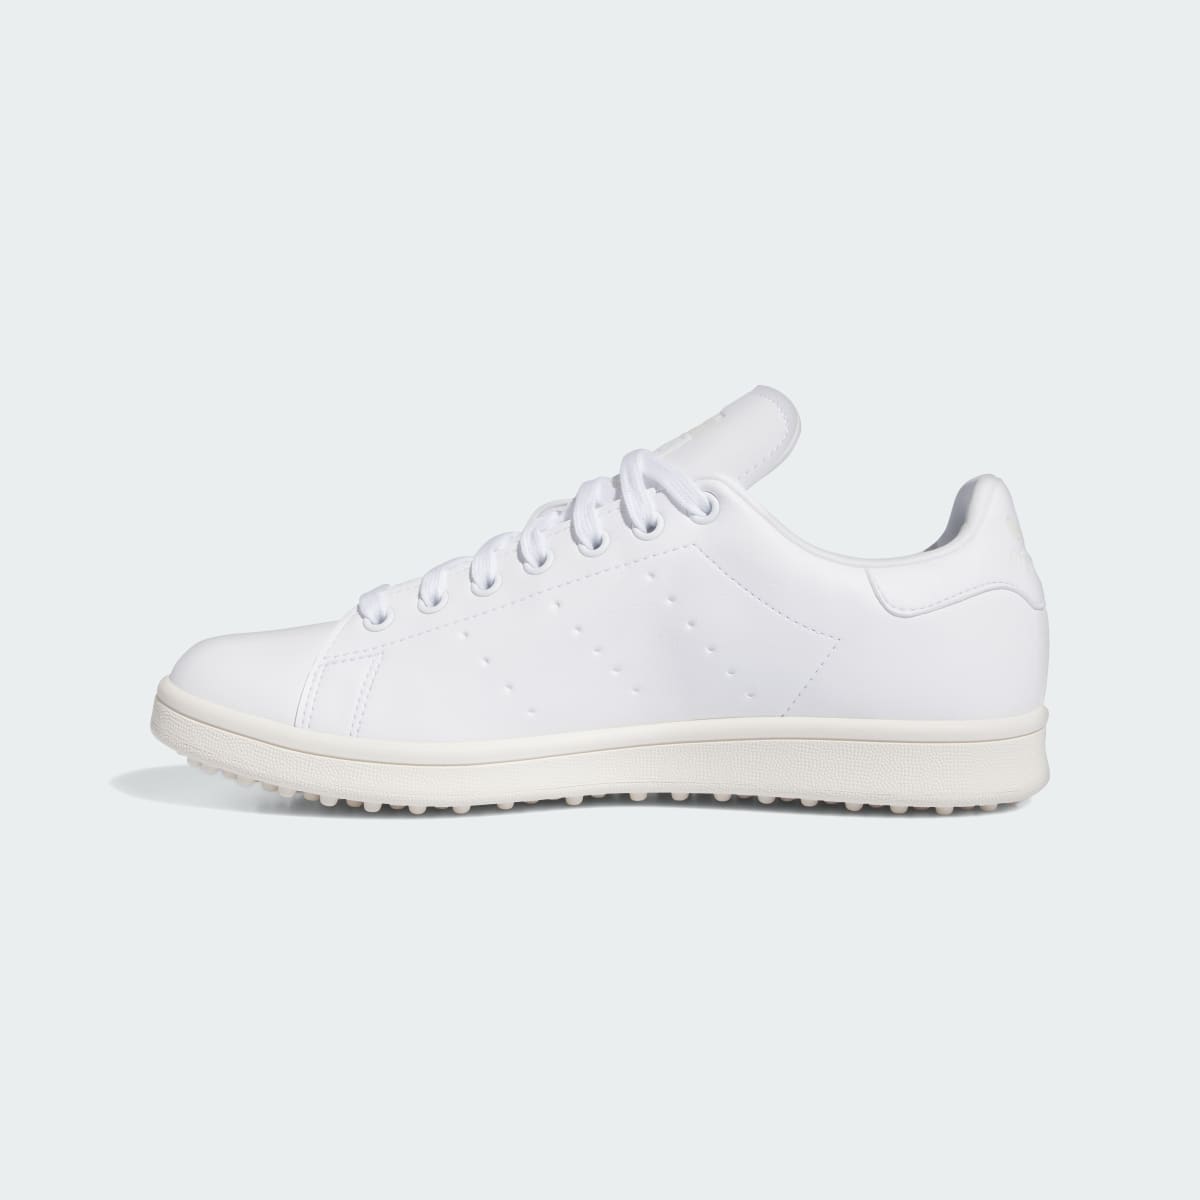 Adidas Stan Smith Golf Shoes. 7